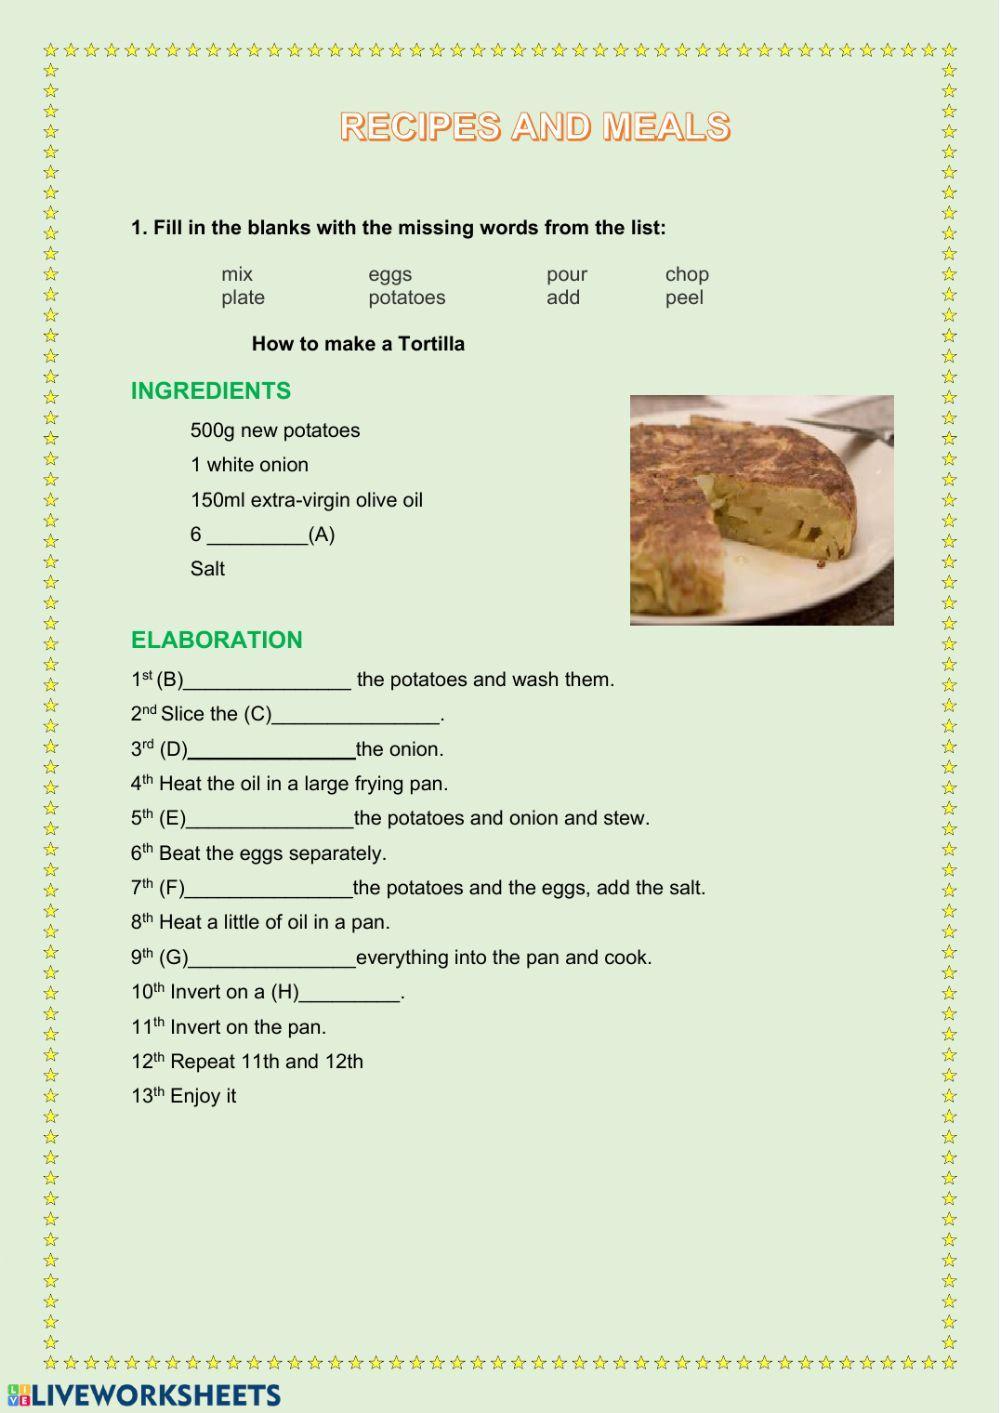 Recipe and meals